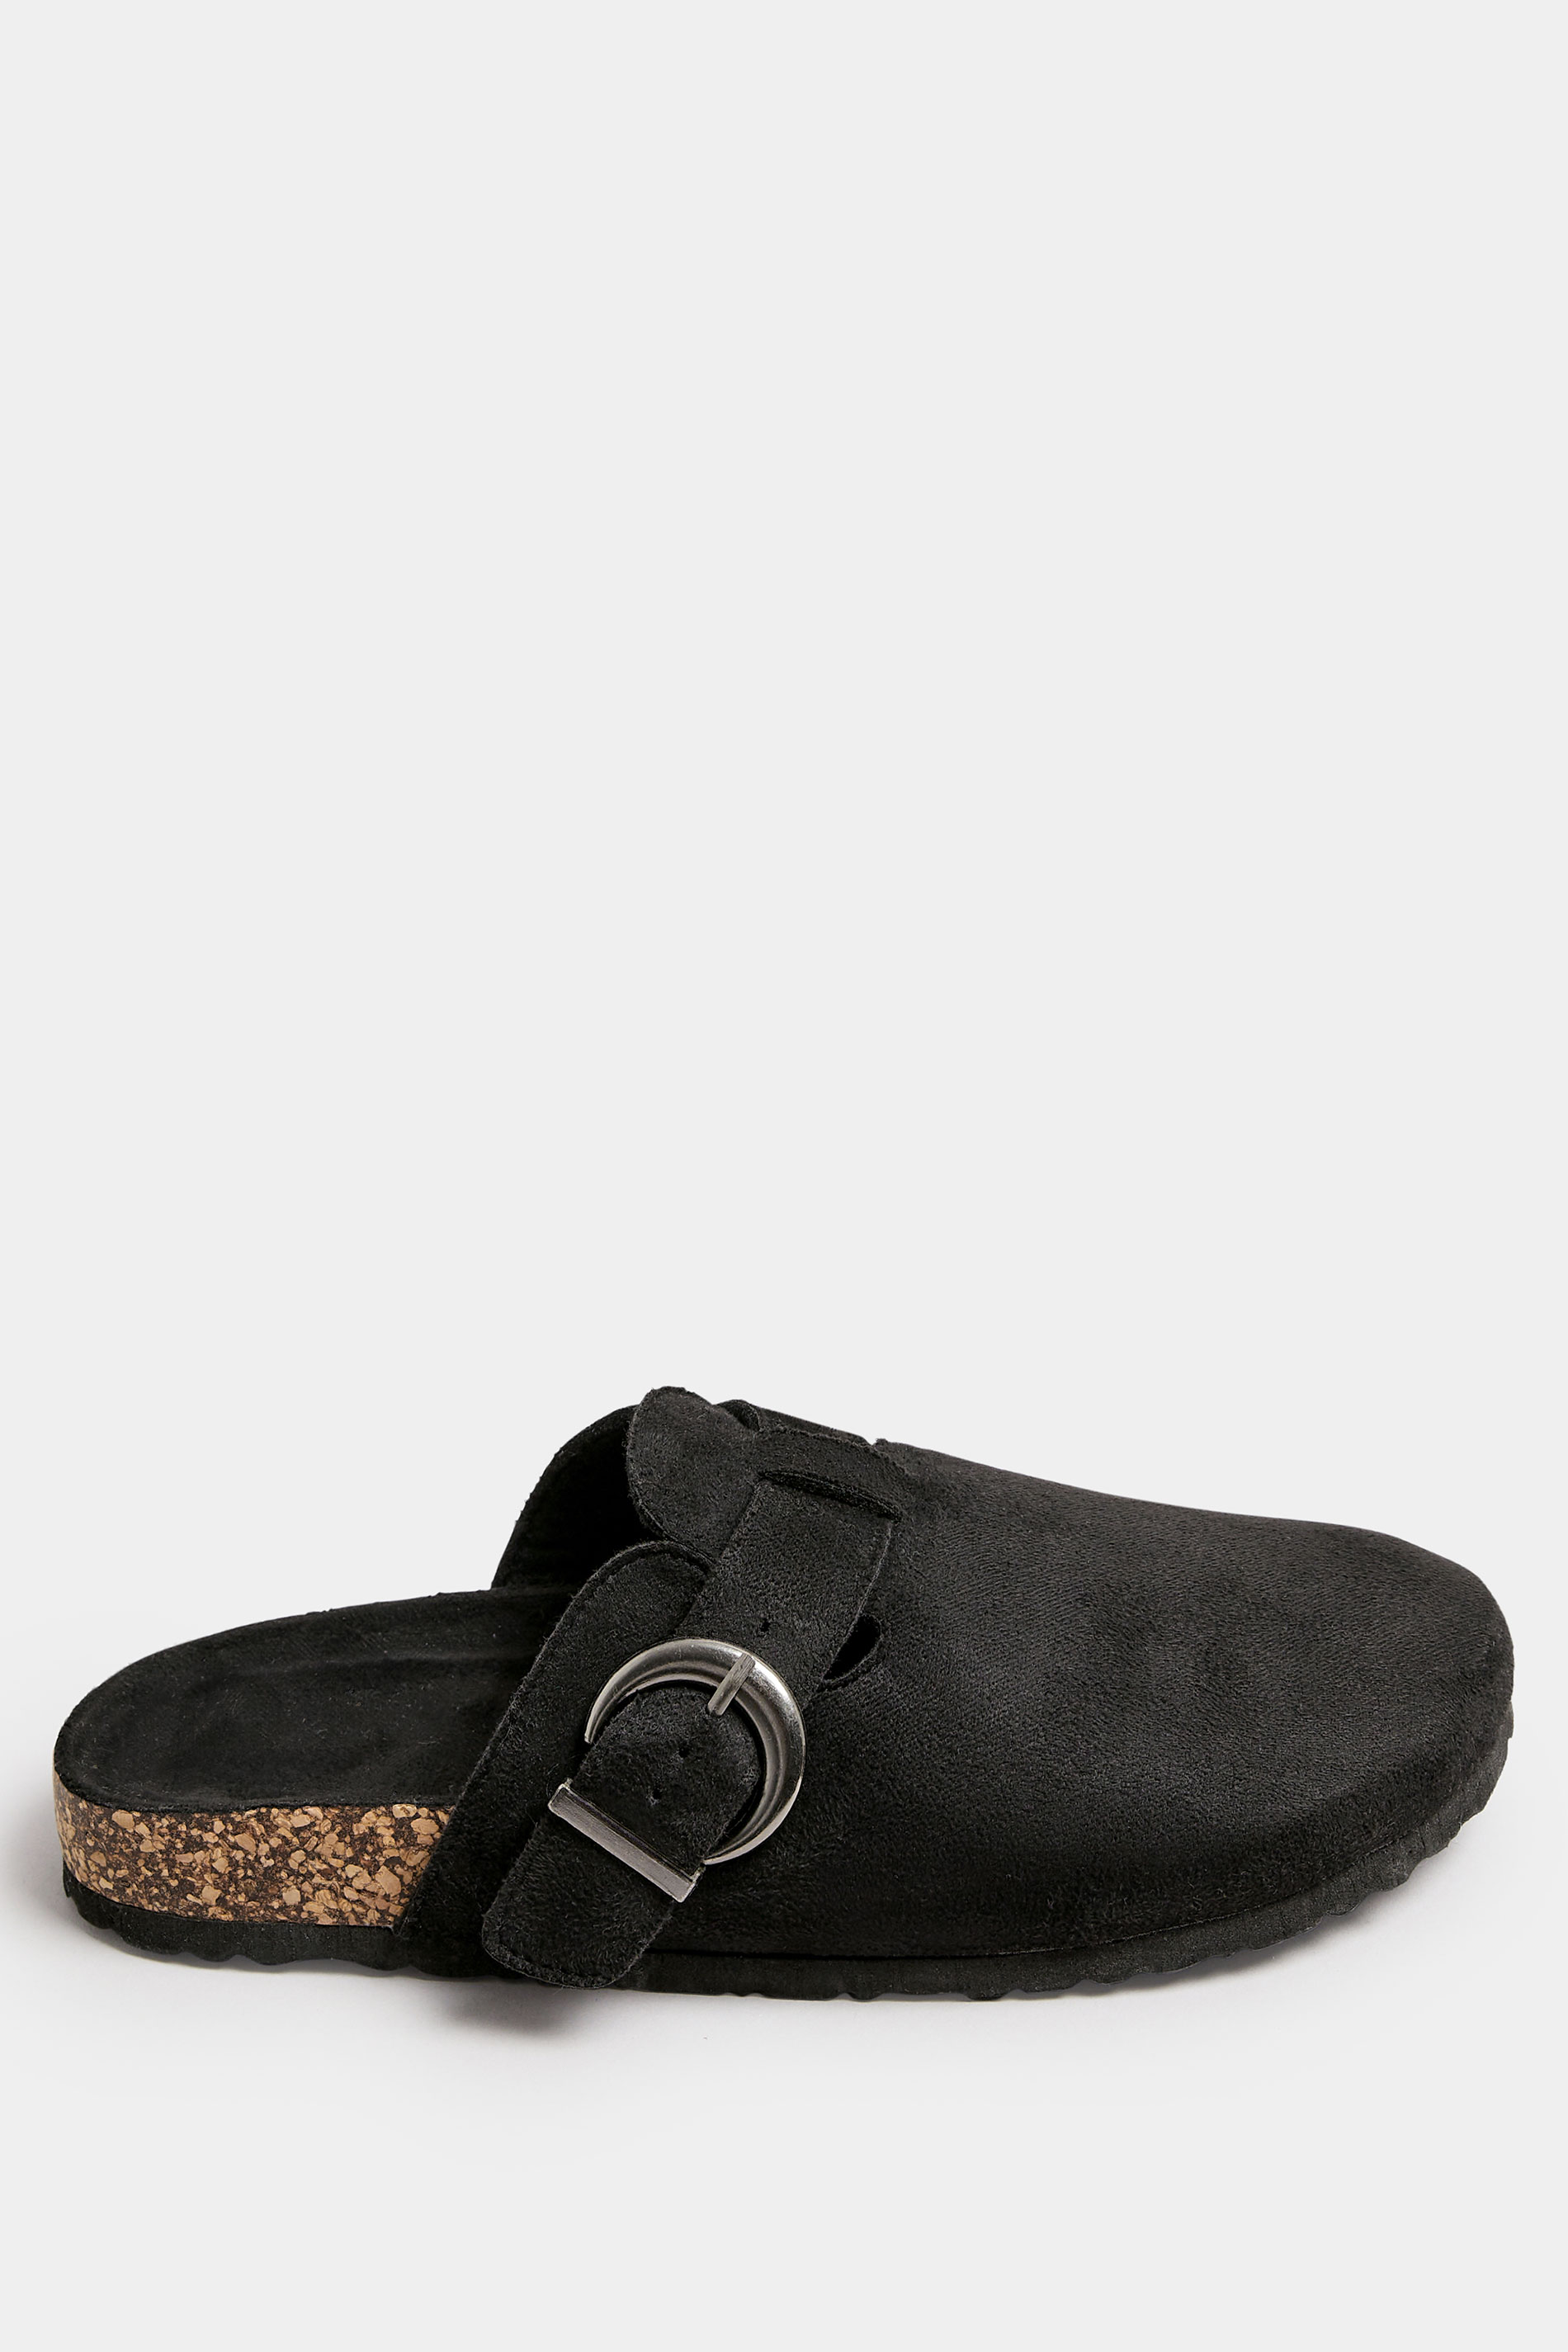 Black Faux Suede Clogs In Extra Wide EEE Fit | Yours Clothing 3